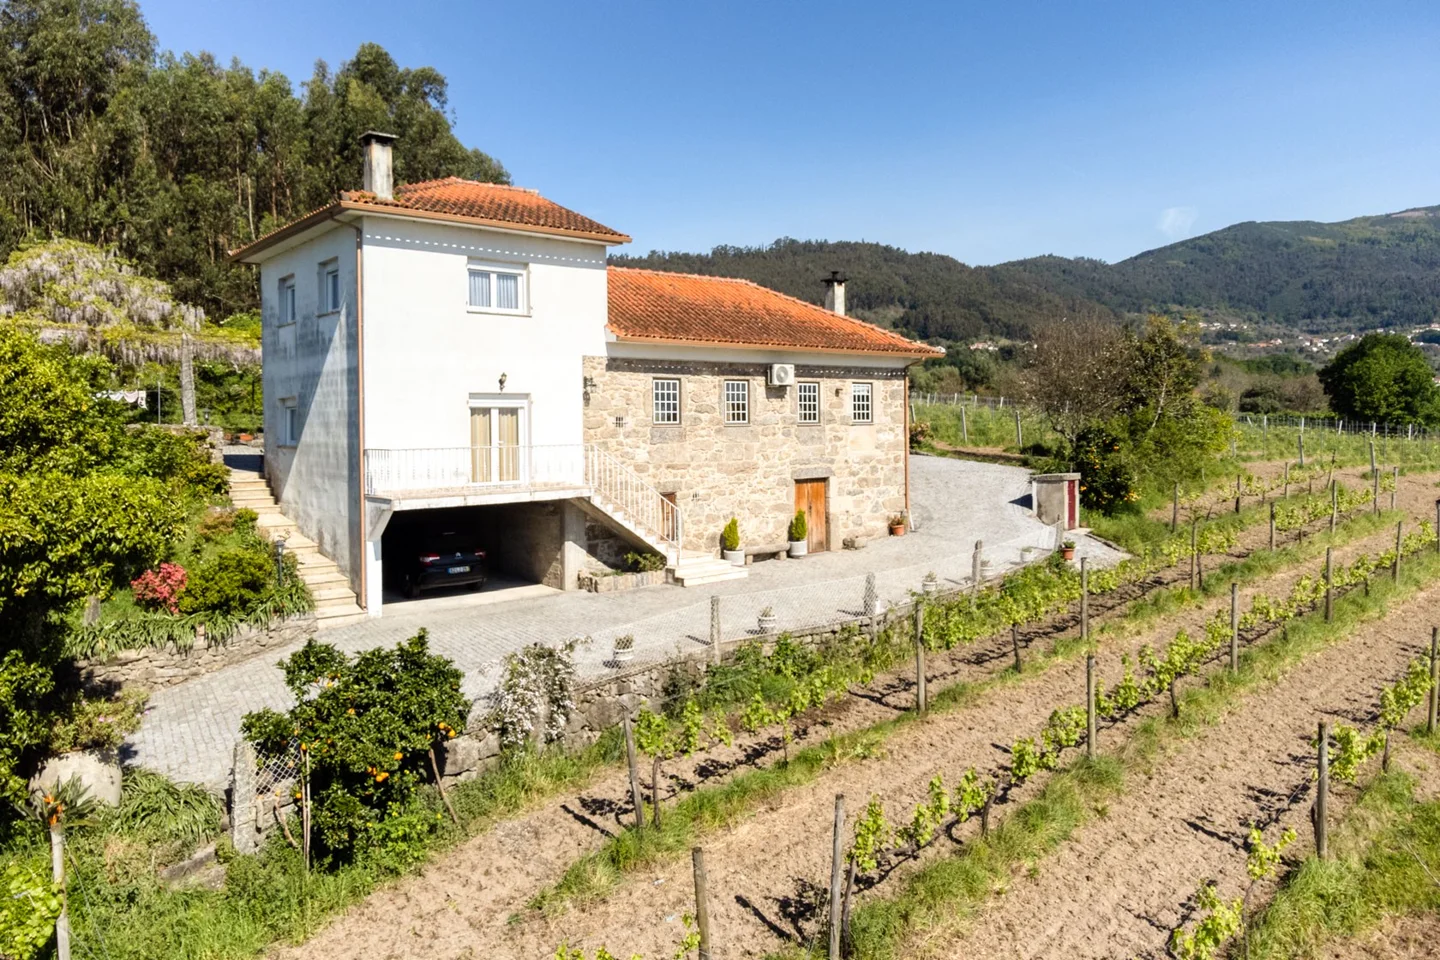 Country House with Three Hectares of Vineyard